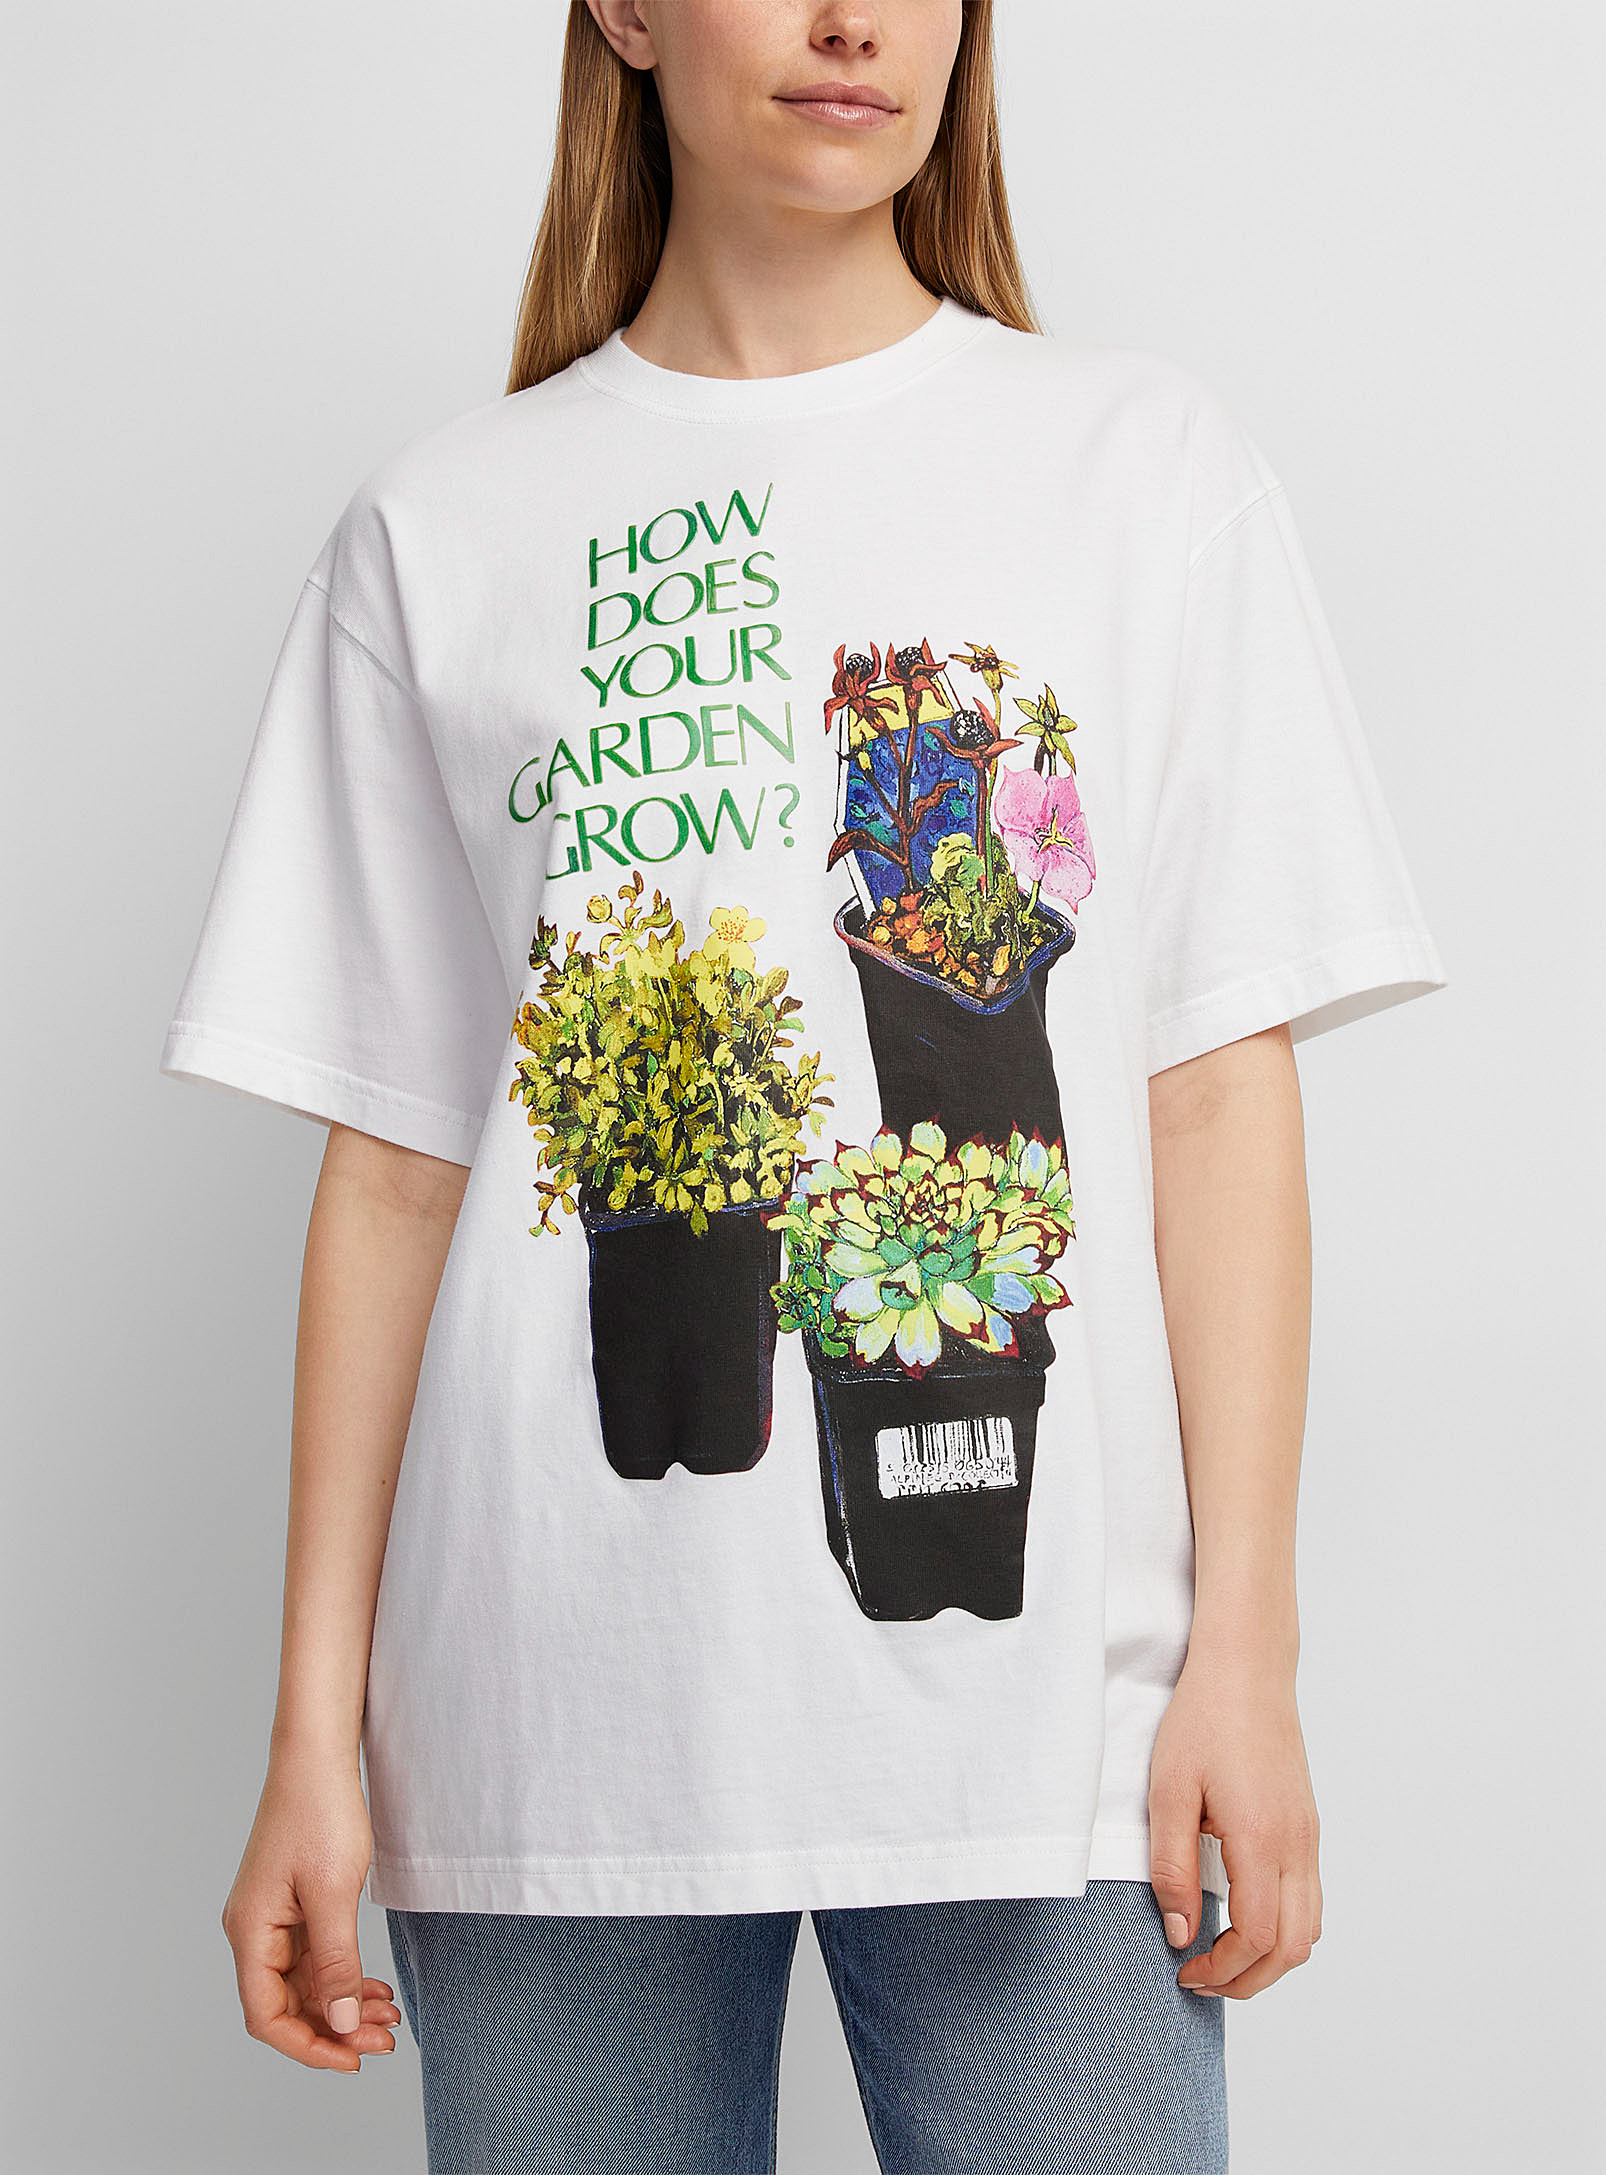 JW Anderson - Women's How does your garden grow? T-shirt